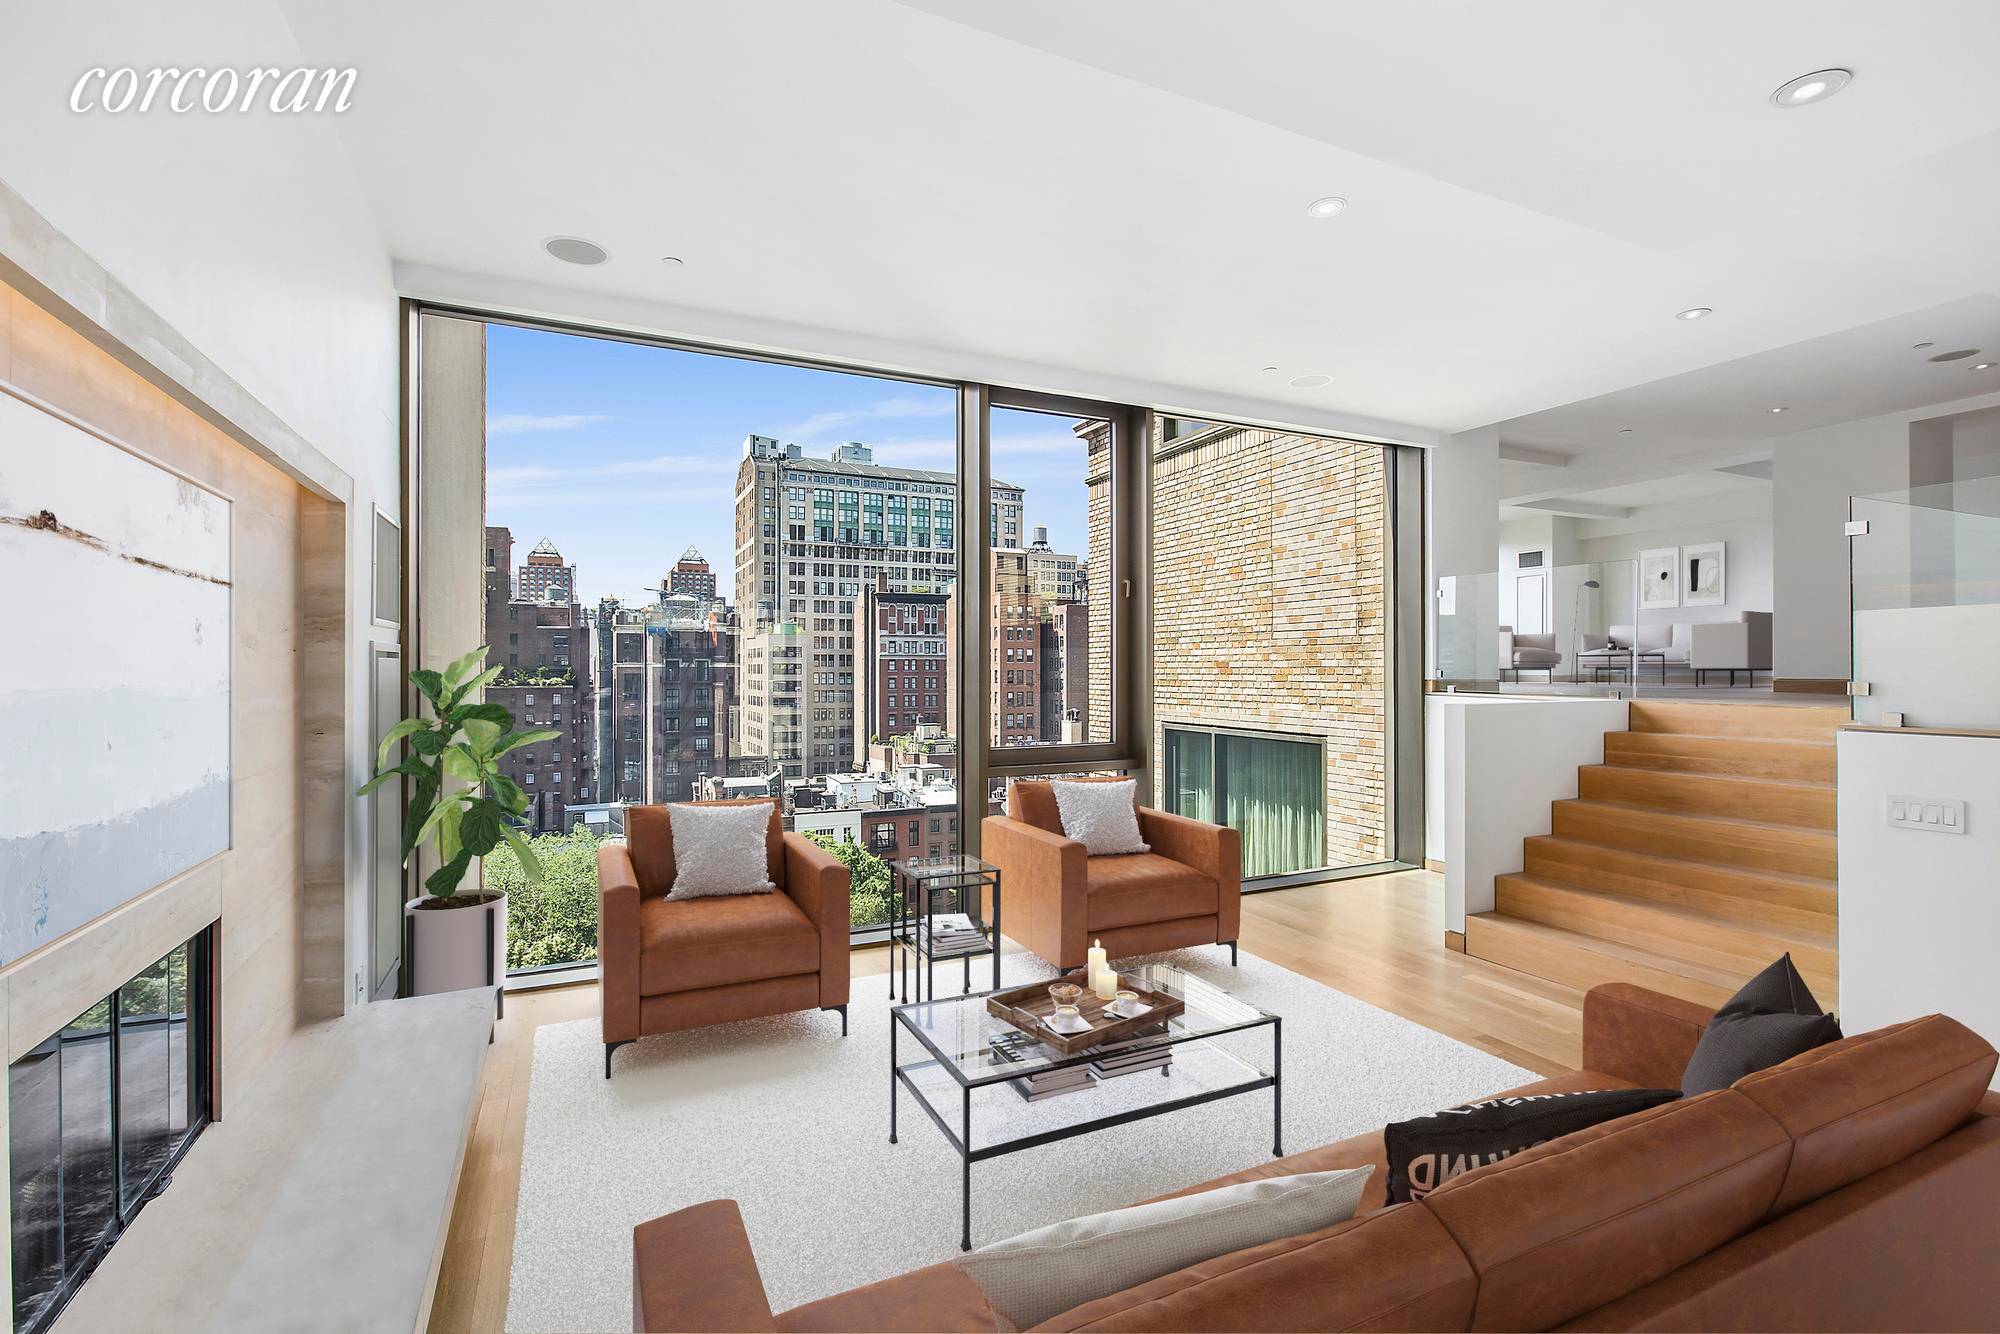 This stunning full floor, 3, 809 sq ft residence embraces 75 feet of uninterrupted views of Gramercy Park, the only private park in Manhattan.